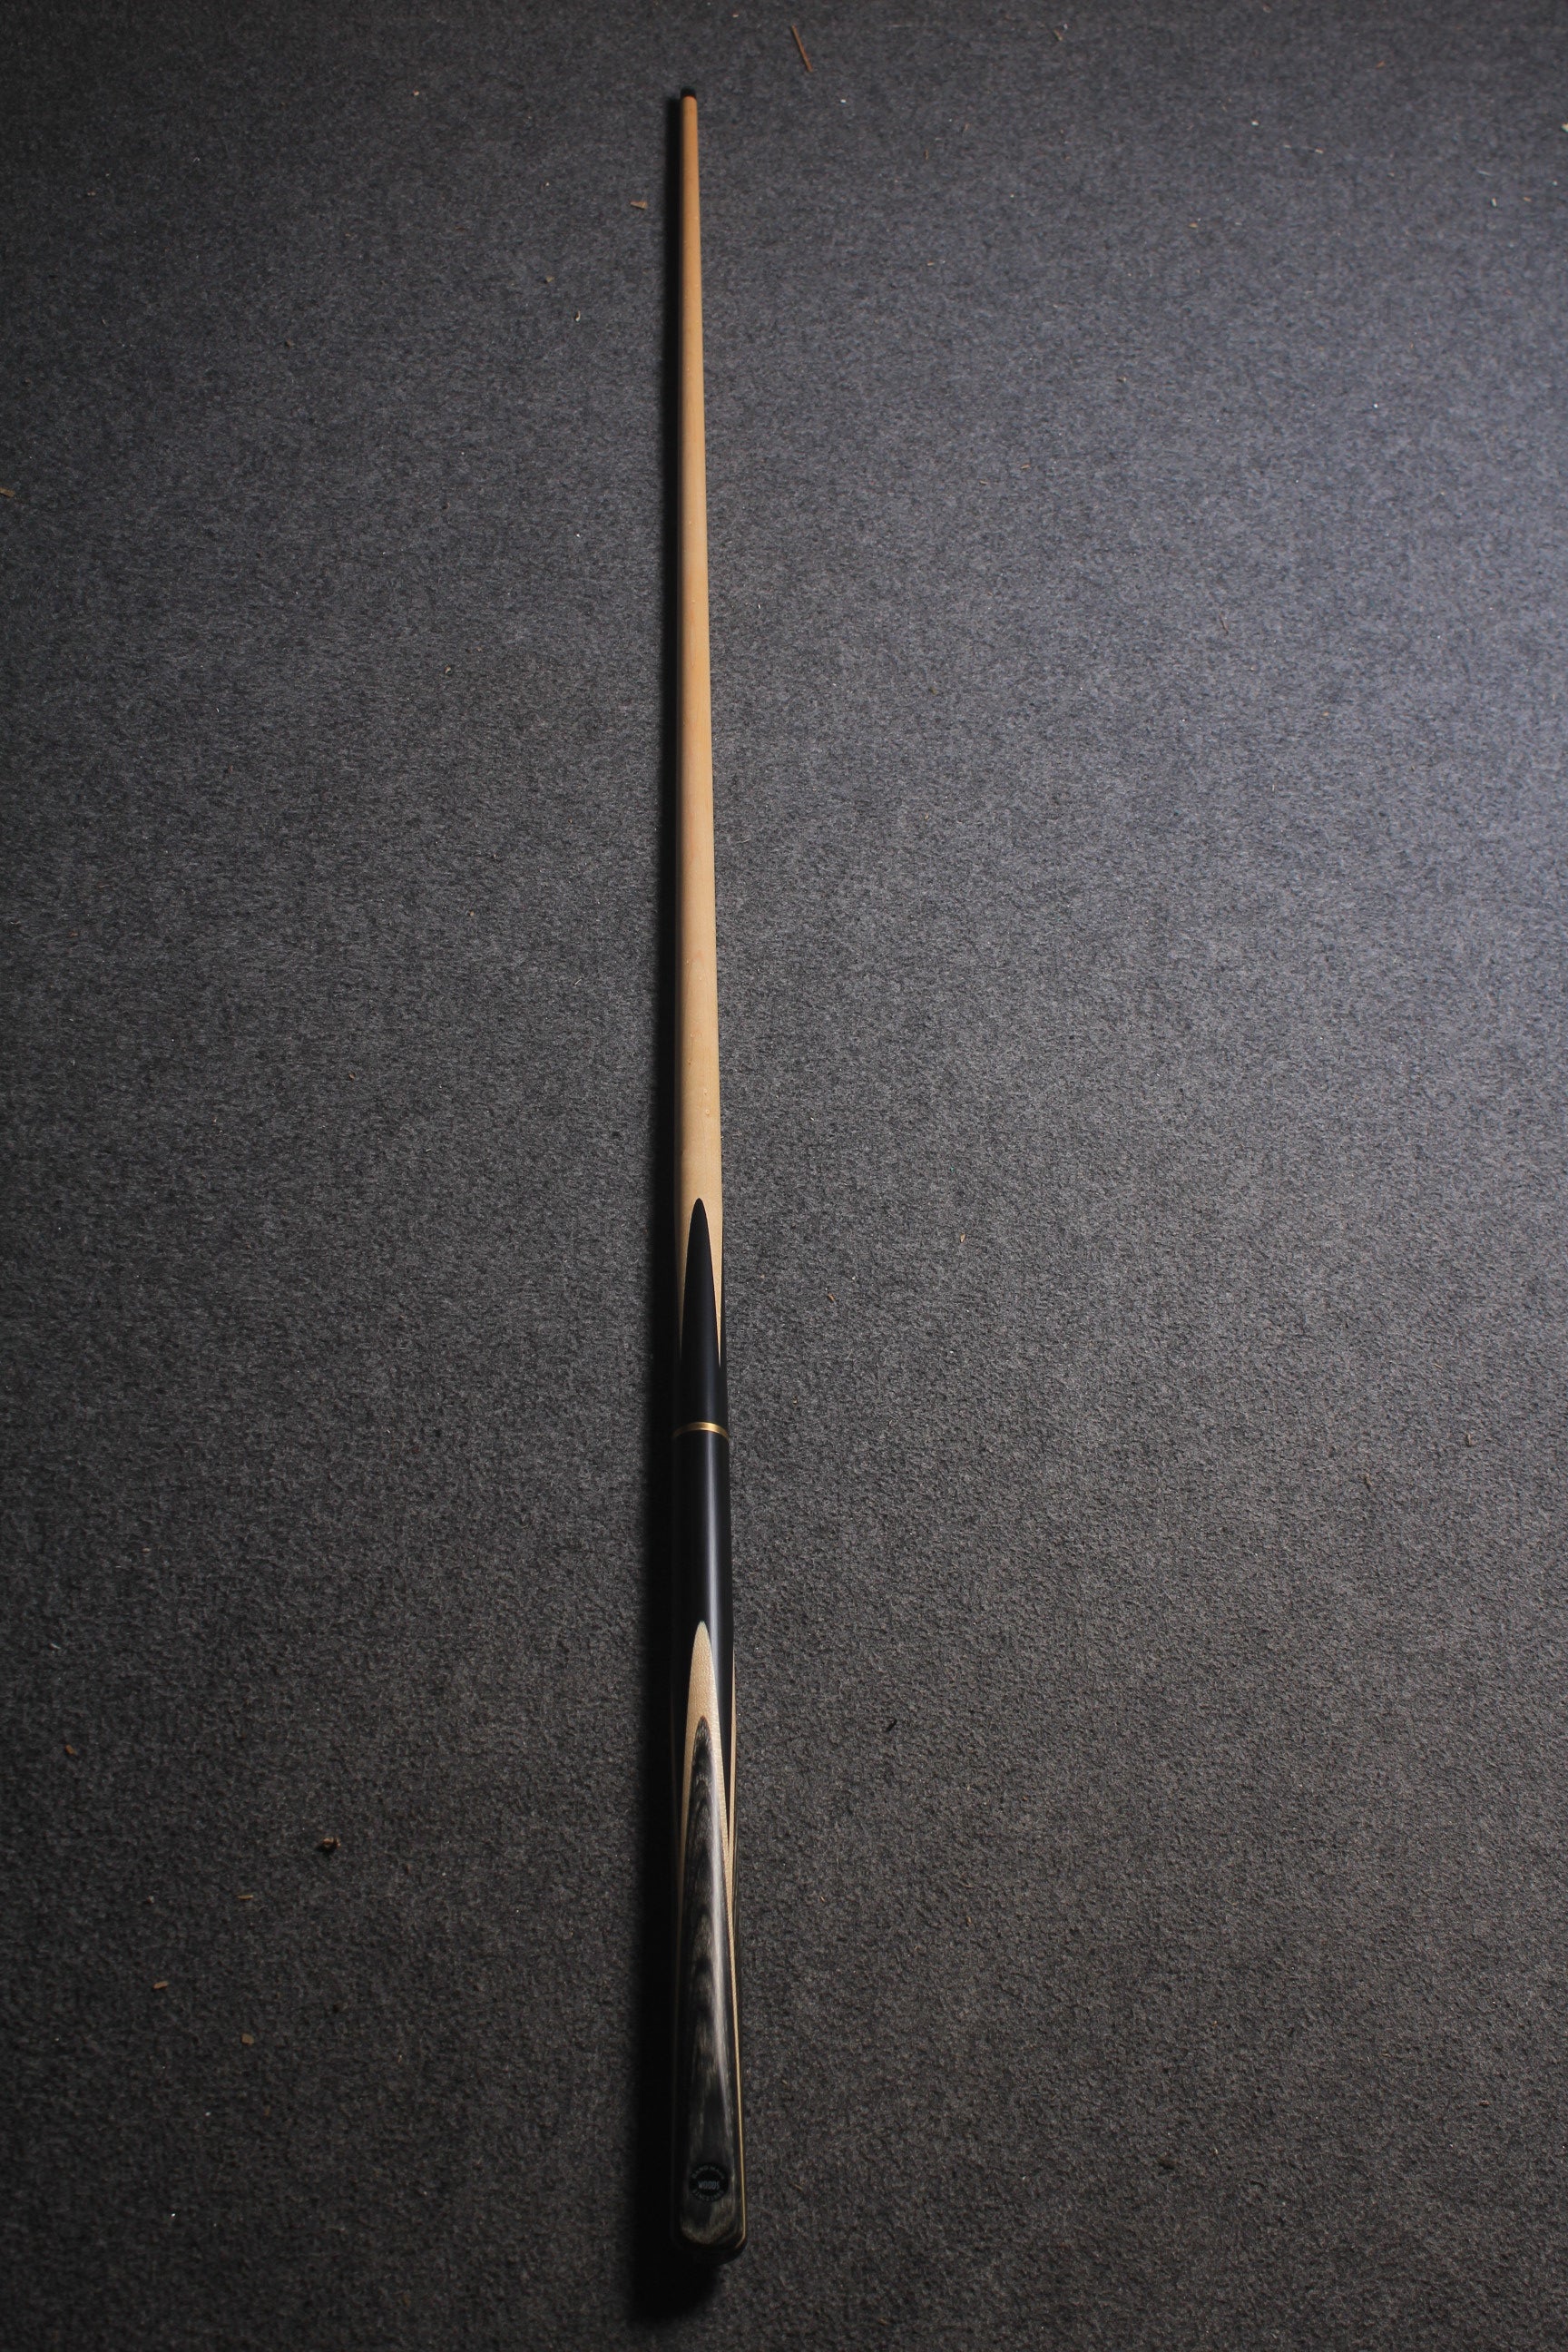 3/4 handmade 11mm maple chinese 8 ball  cue - variant length